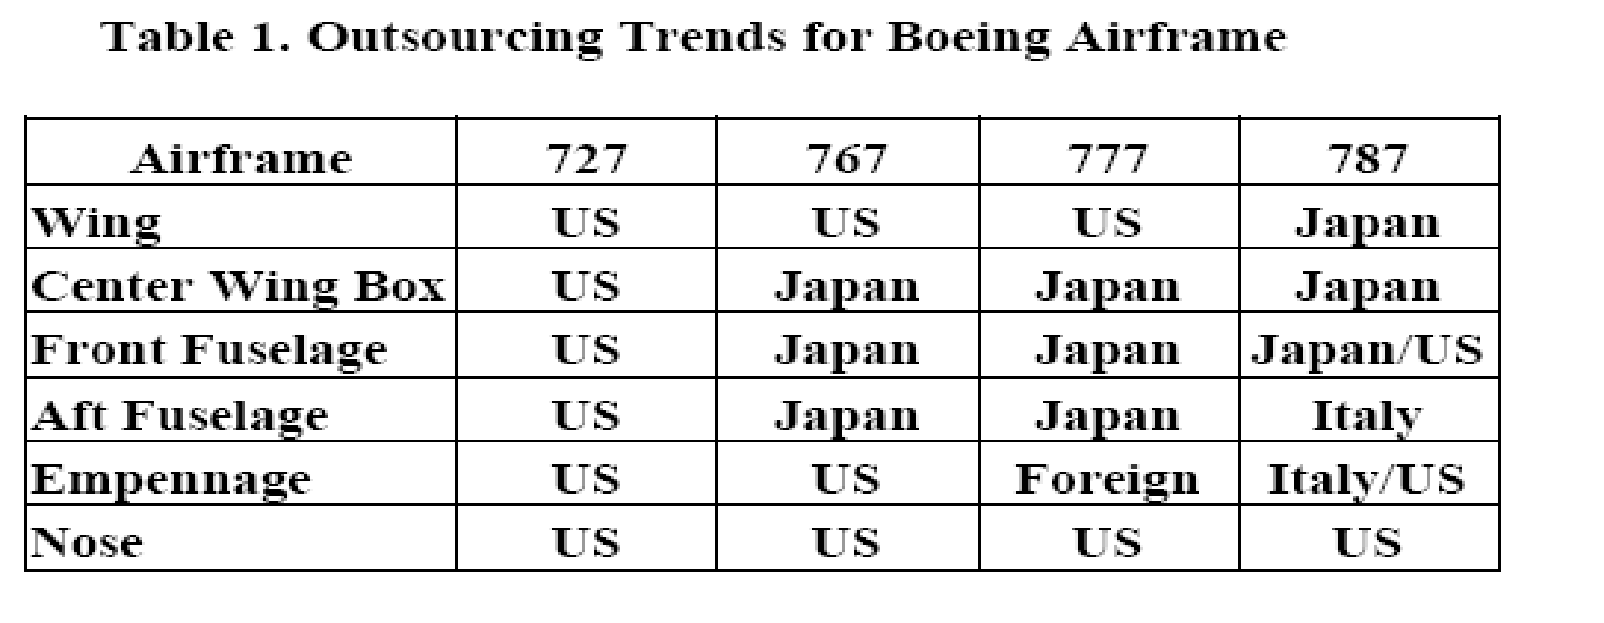 Outsourcing trends of Boeing